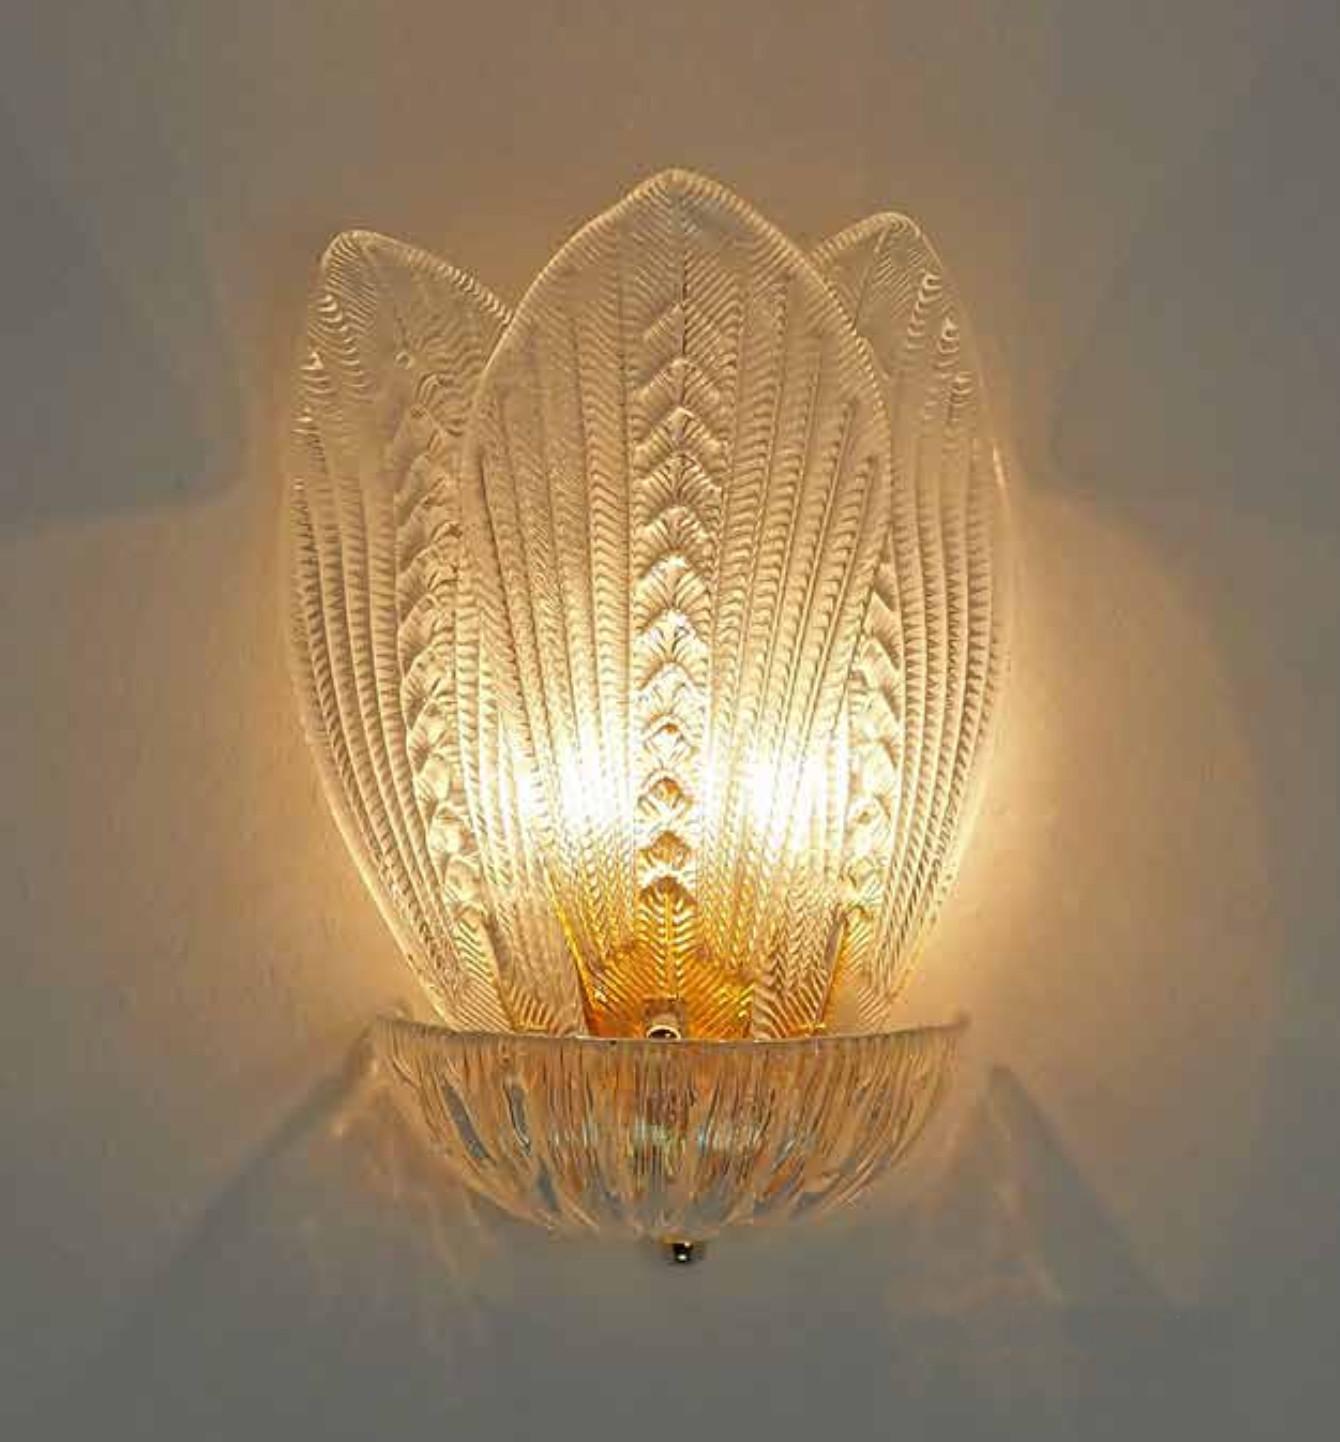 Italian wall light with clear textured Murano glass leaves mounted on 24 K gold plated finish metal frame / Made in Italy in the style of Barovier e Toso
Measures: height 16 inches, width 10.5 inches, depth 7 inches
2 light / E12 or E14 type / max